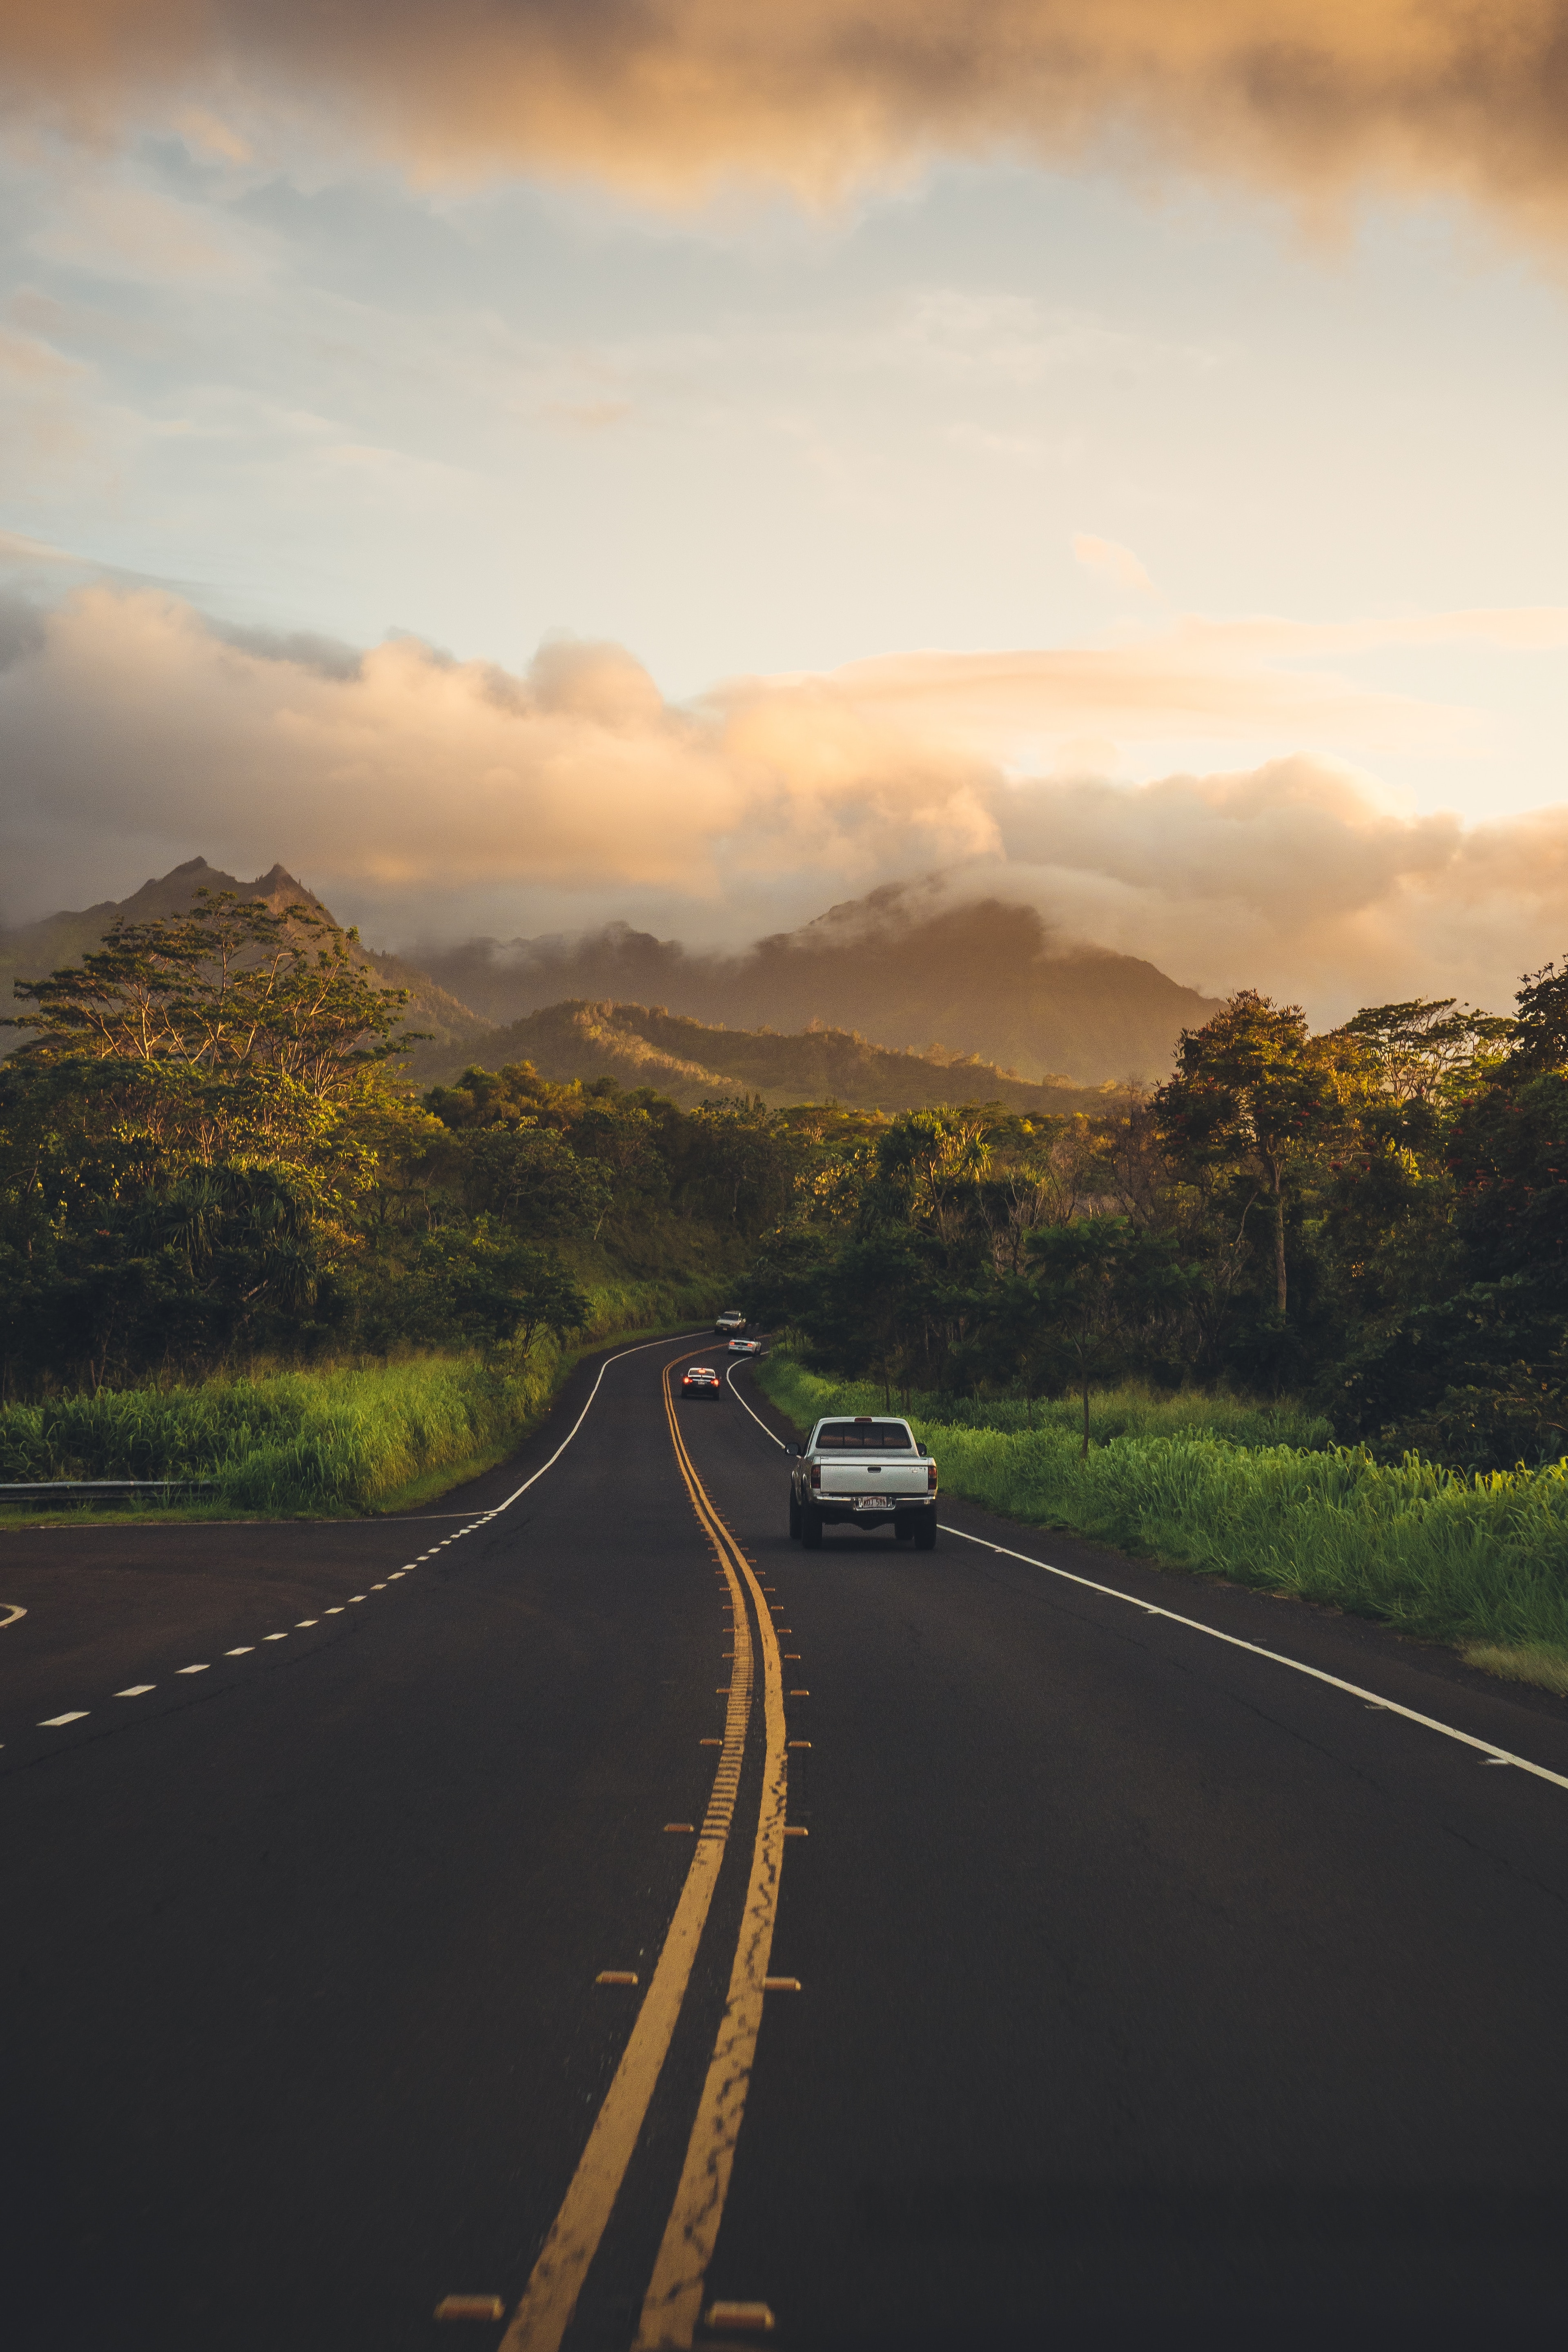 Will you go on a never ending road trip?